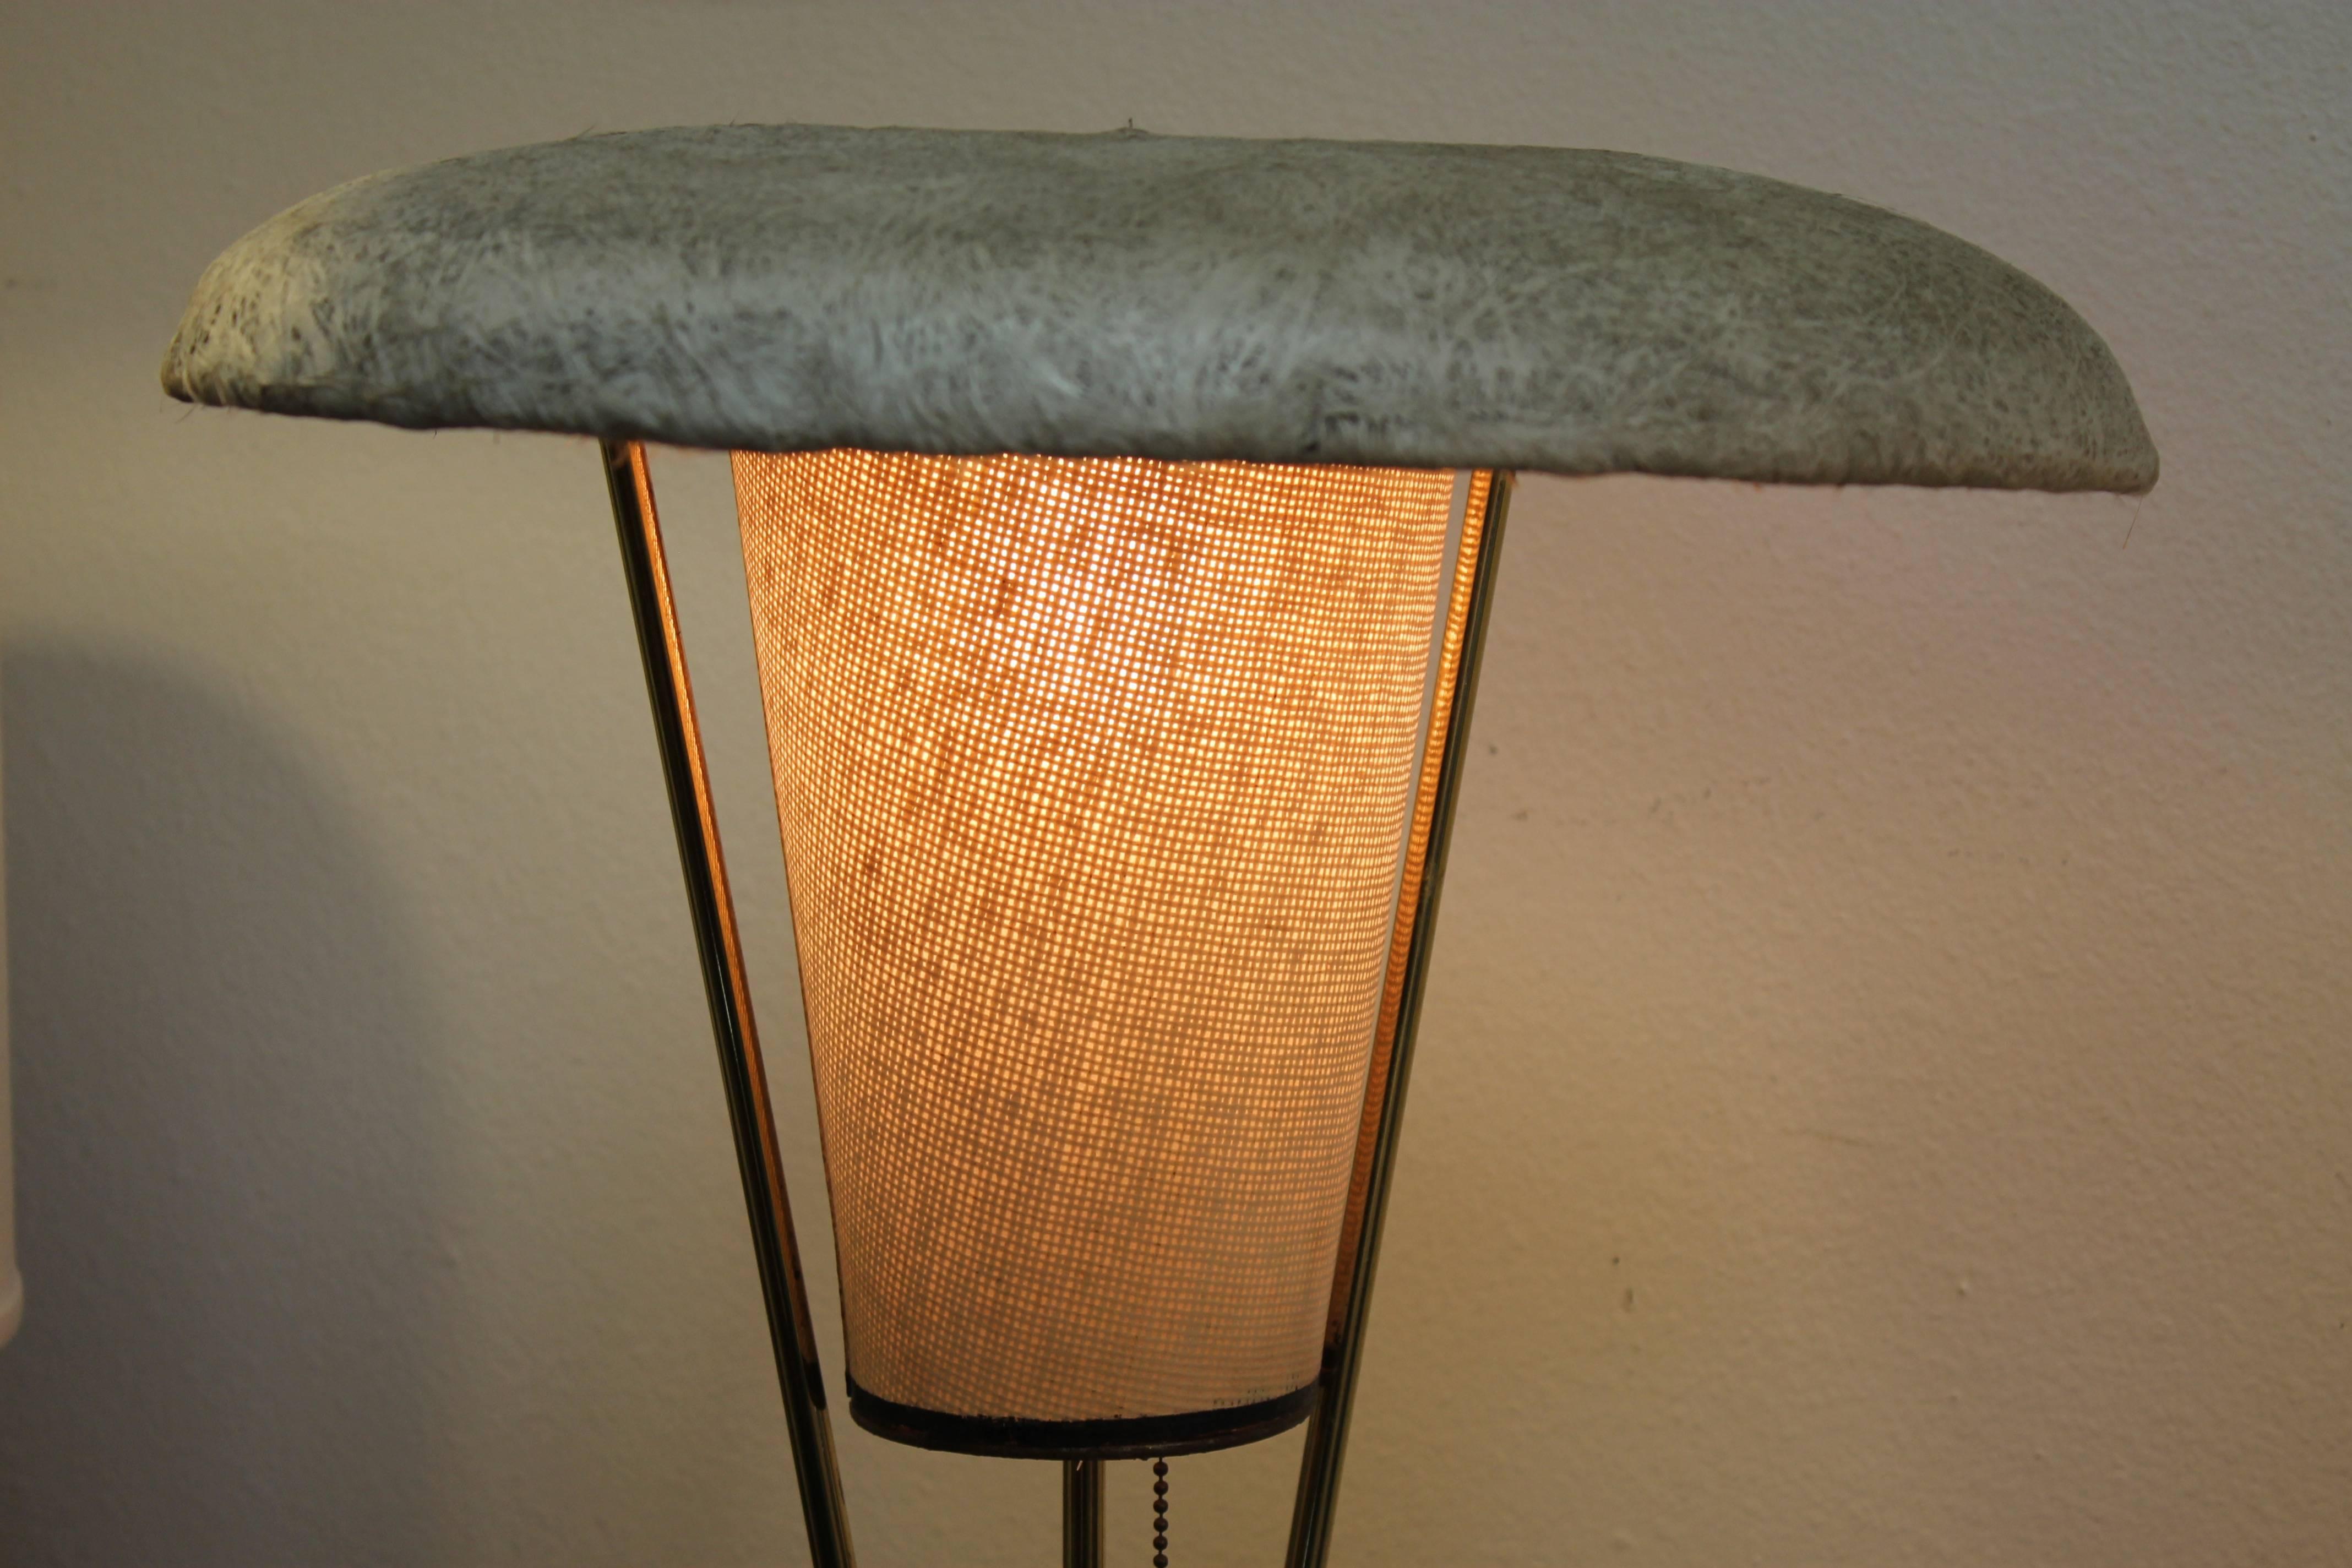 A circa 1950s table lamp with boomerang shaped wood base, brass hardware, woven linen cone shade and spun fiberglass deflector. The fiberglass top has a circular indentation that really sets off the design. Measure: Overall height of this lamp is